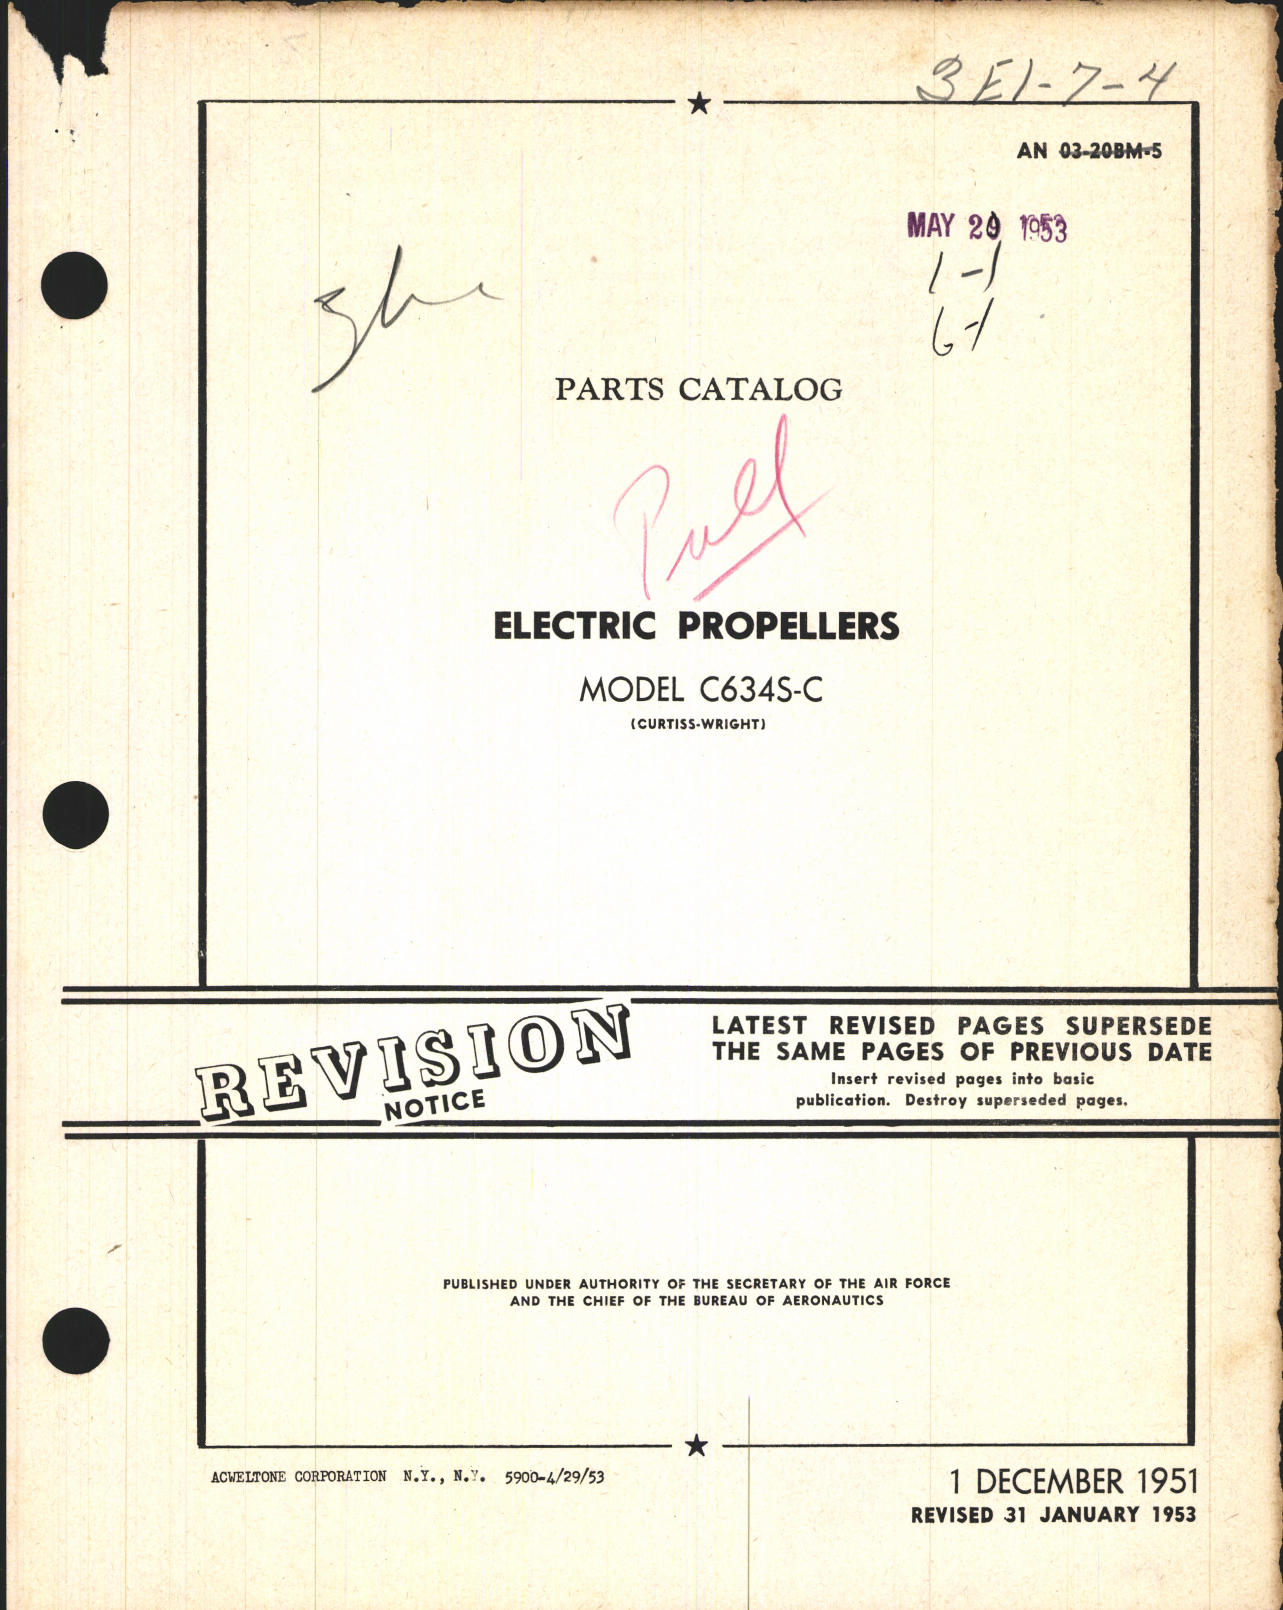 Sample page 1 from AirCorps Library document: Parts Catalog for Electric Propellers Model C634S-C